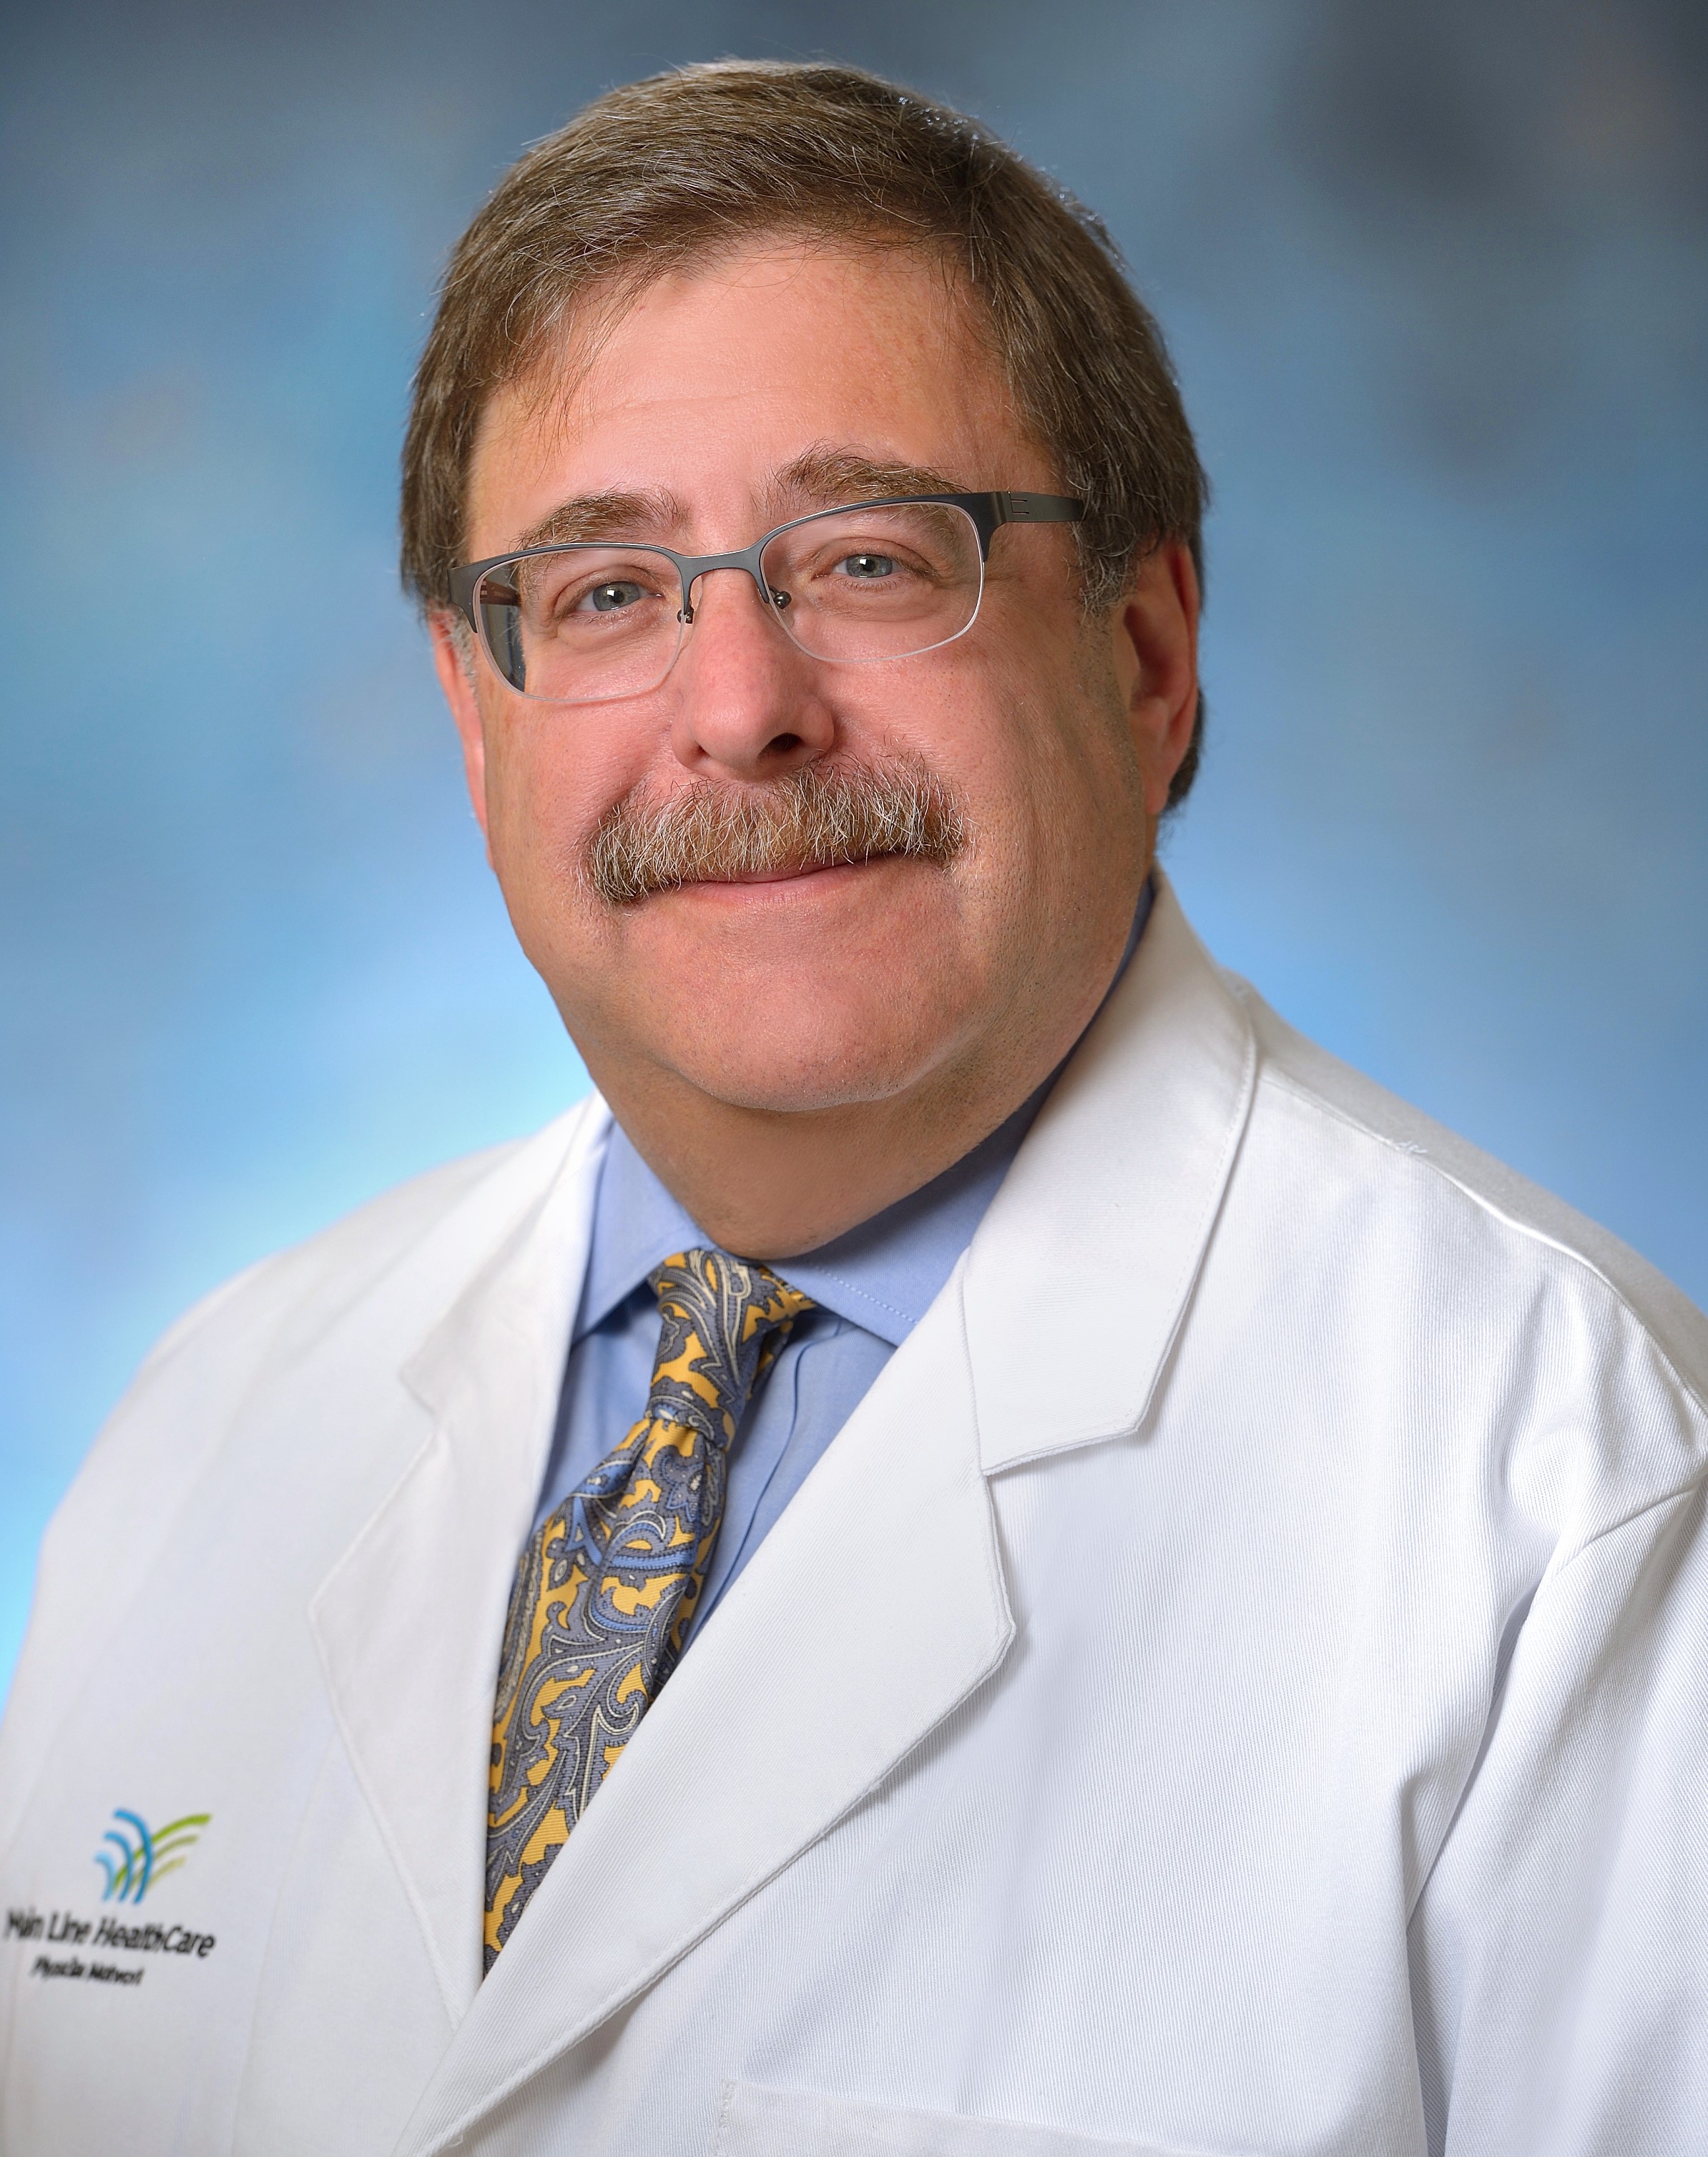 Norman A. Brest, MD